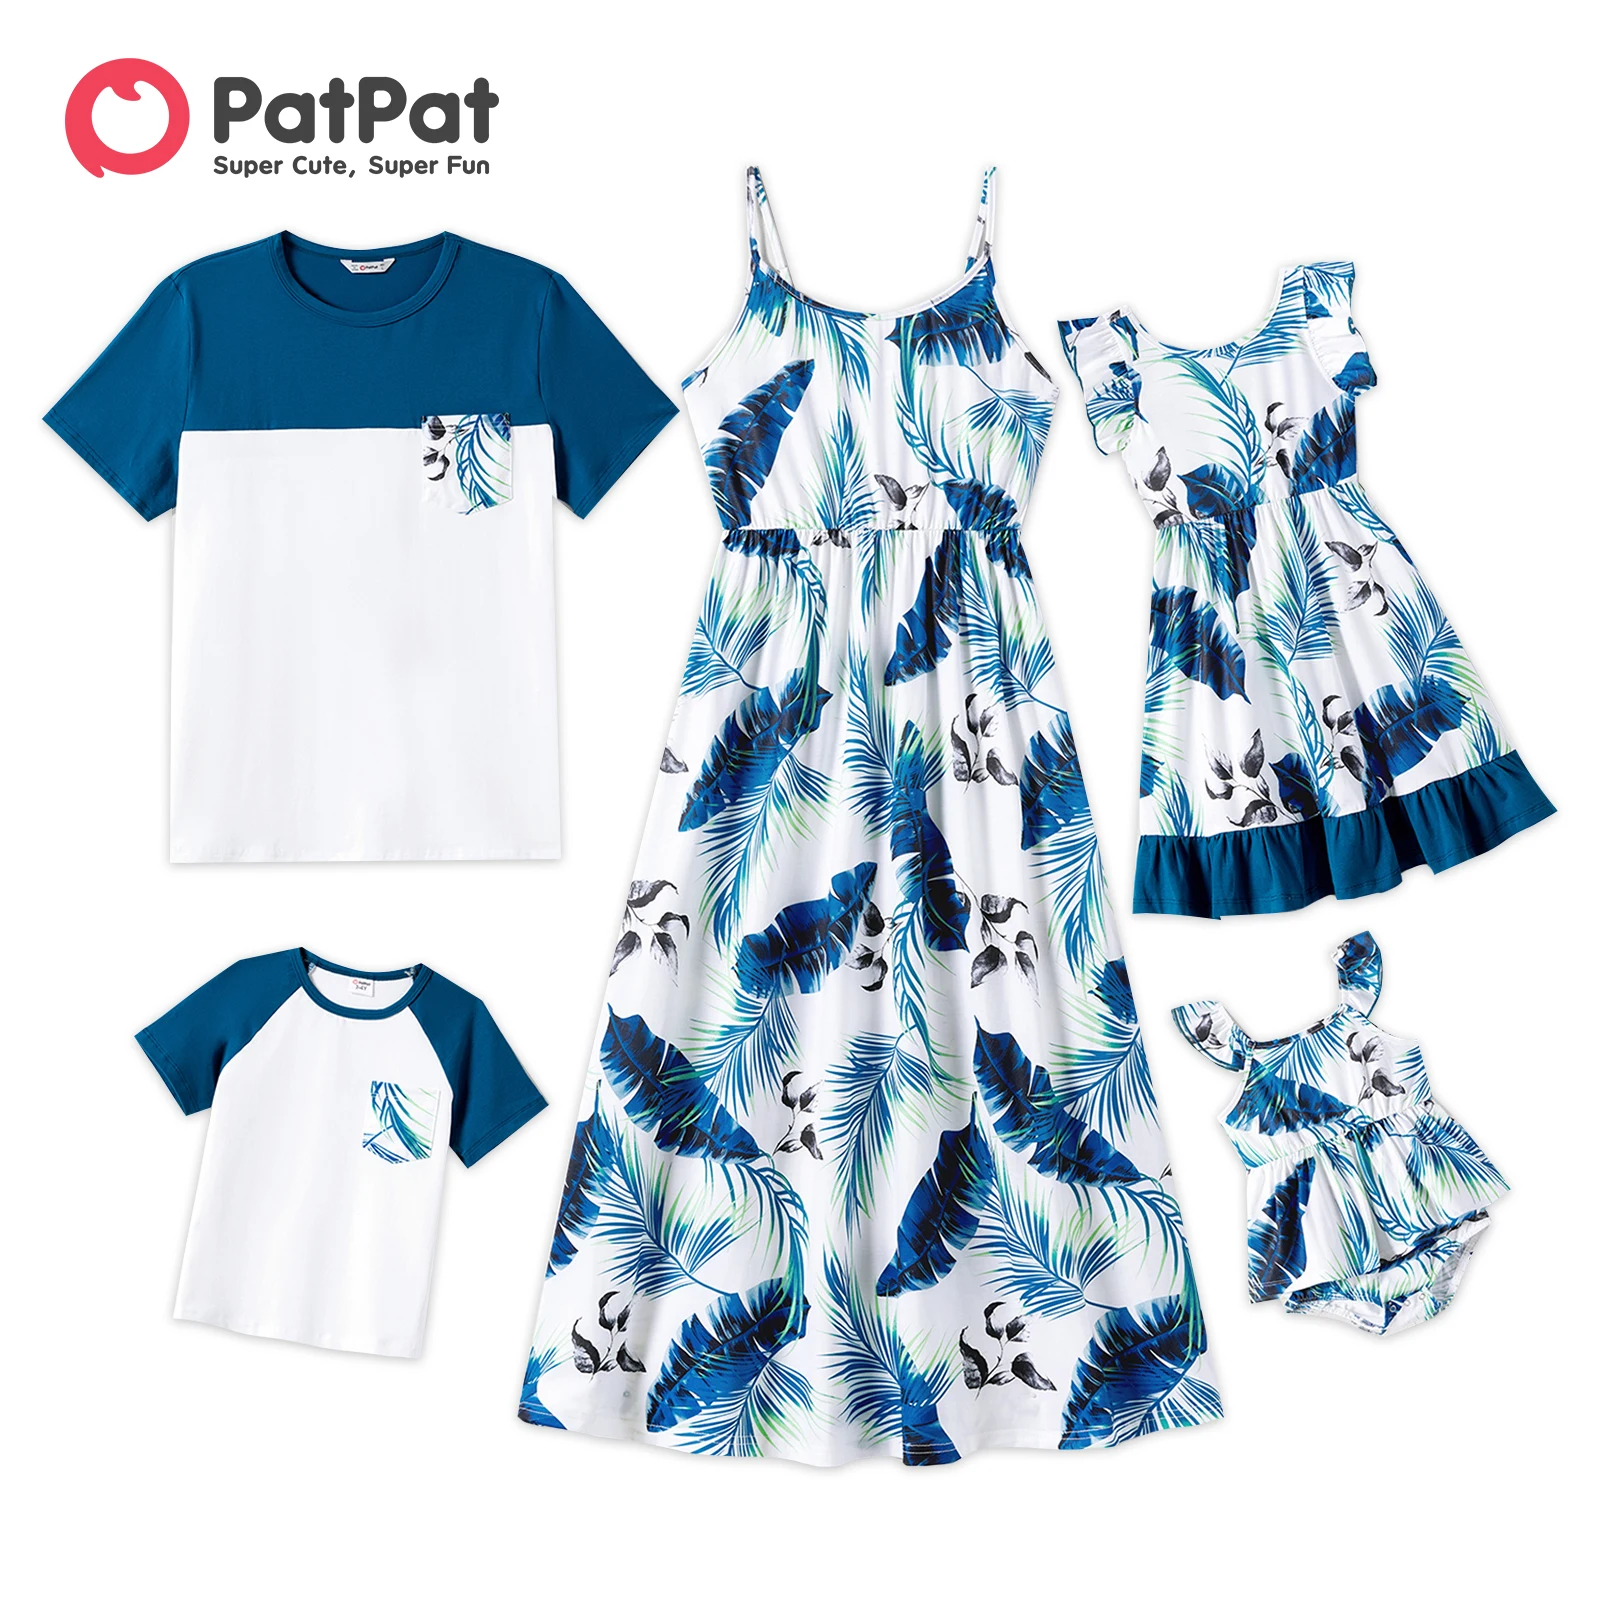 

PatPat Family Matching Outfits Cotton Colorblock Short-sleeve T-shirts and Allover Plant Print Cami Dresses Sets